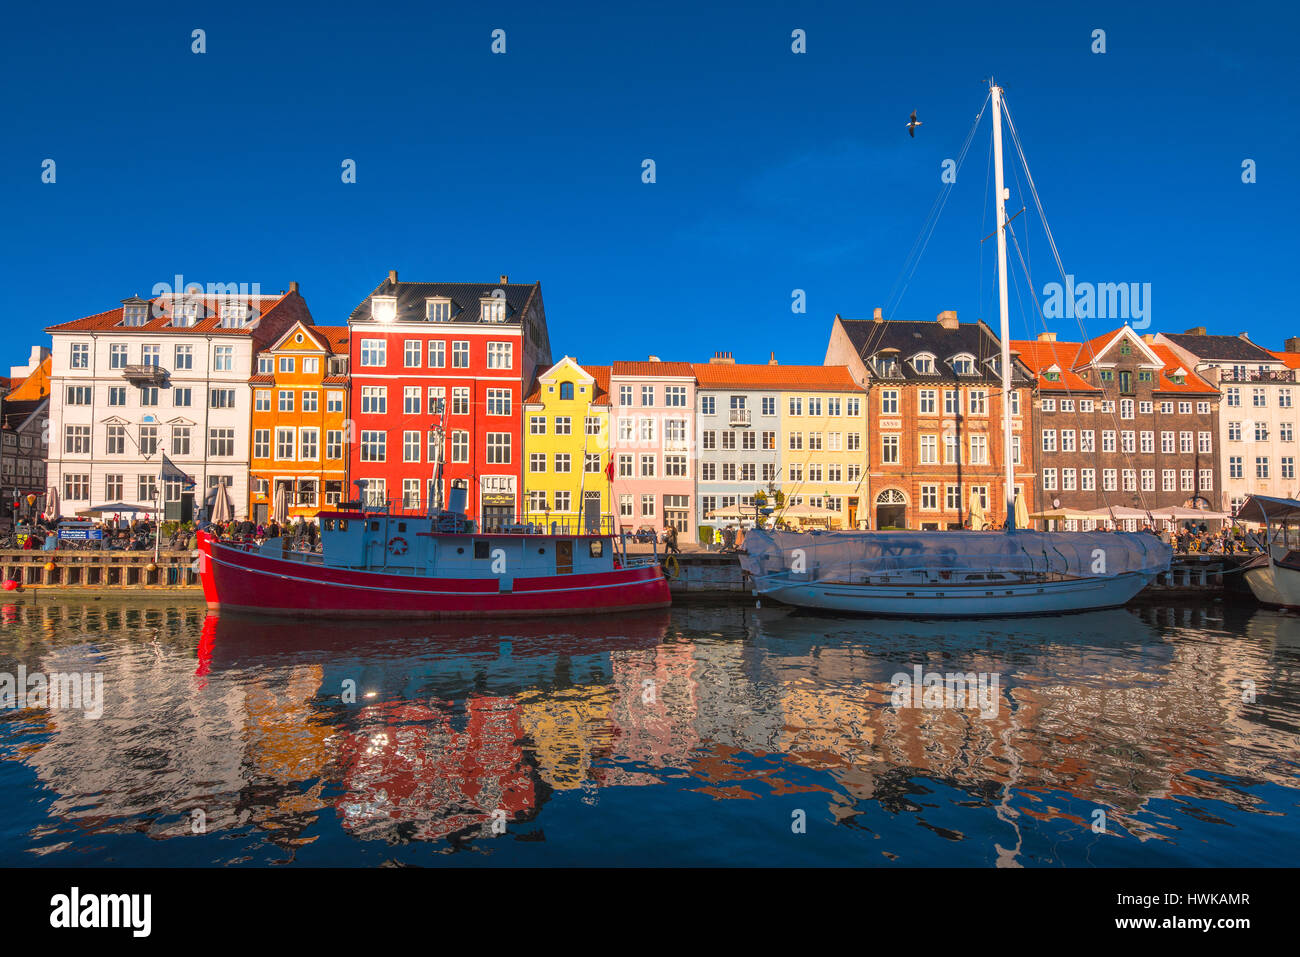 COPENHAGEN, DENMARK - MARCH 11, 2017: Copenhagen Nyhavn canal and promenade with its colorful facades, 17th century waterfront Stock Photo